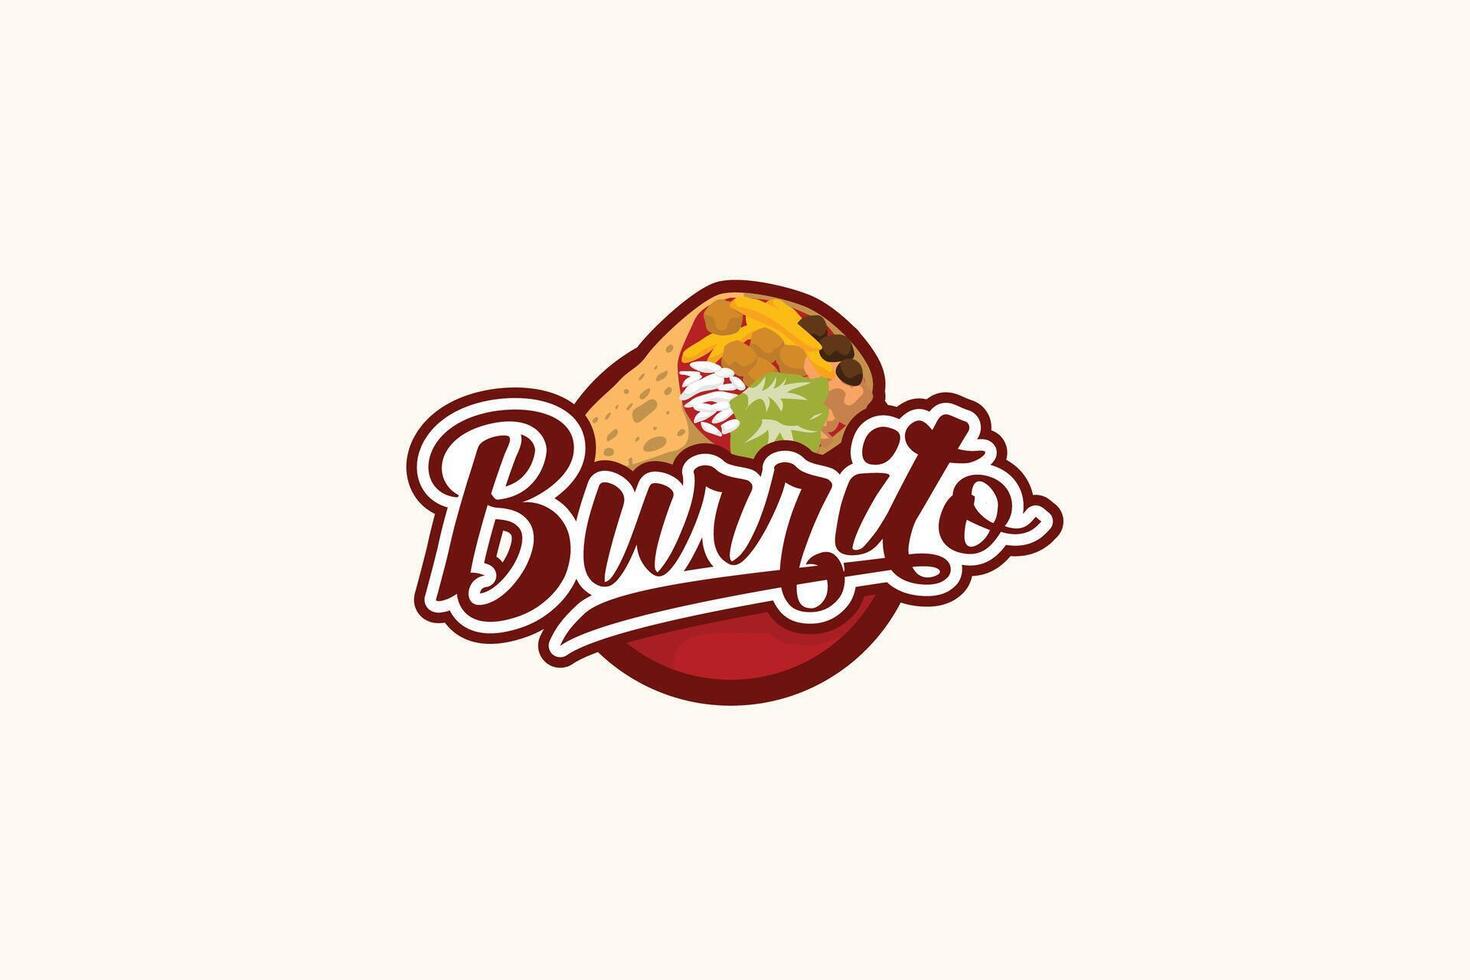 burrito logo with a combination of a burrito and beautiful lettering for cafes, restaurants, food trucks, etc. vector